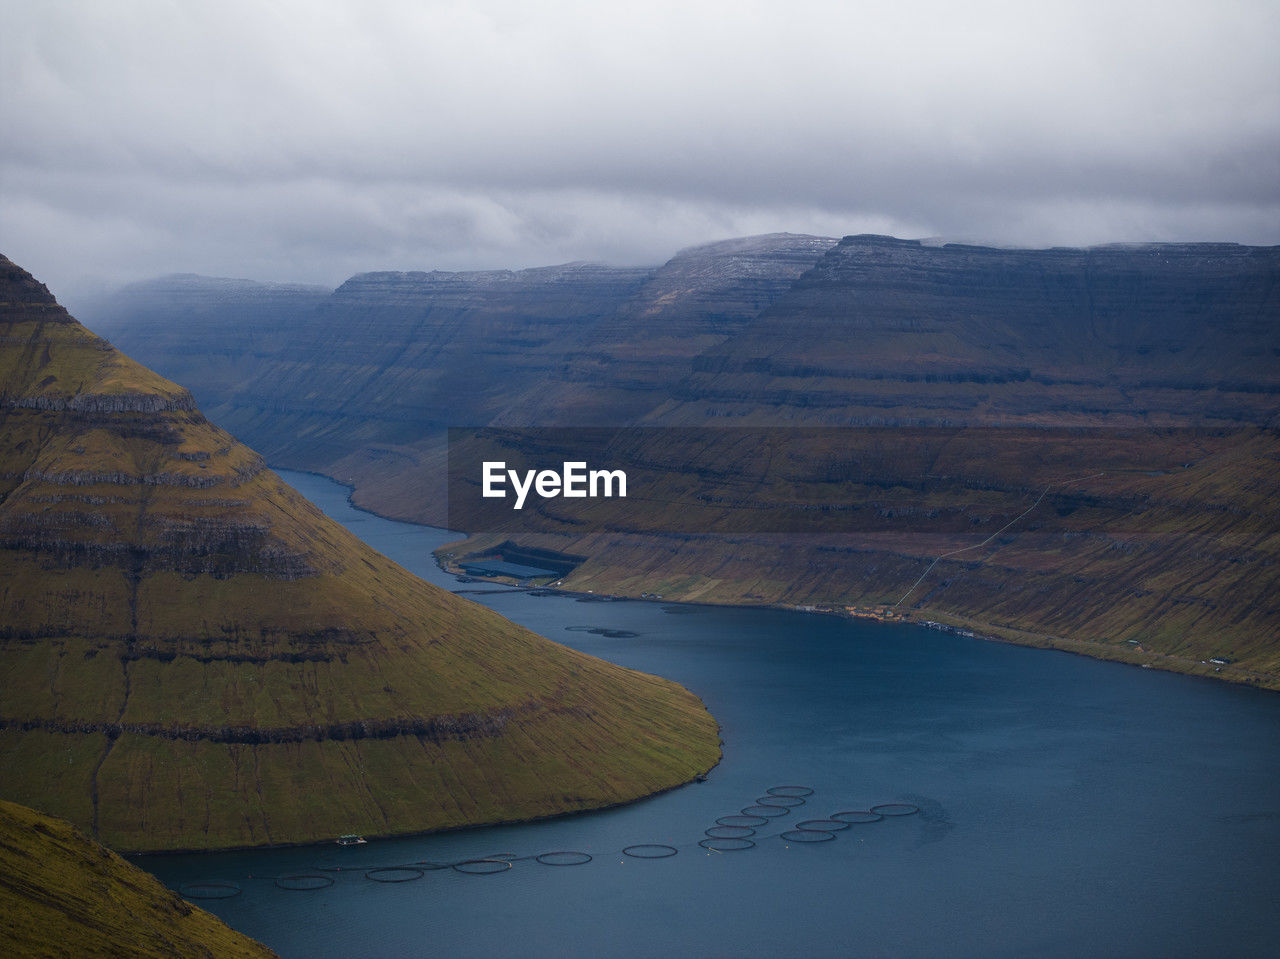 The fjords of the faroe islands on a gloomy day